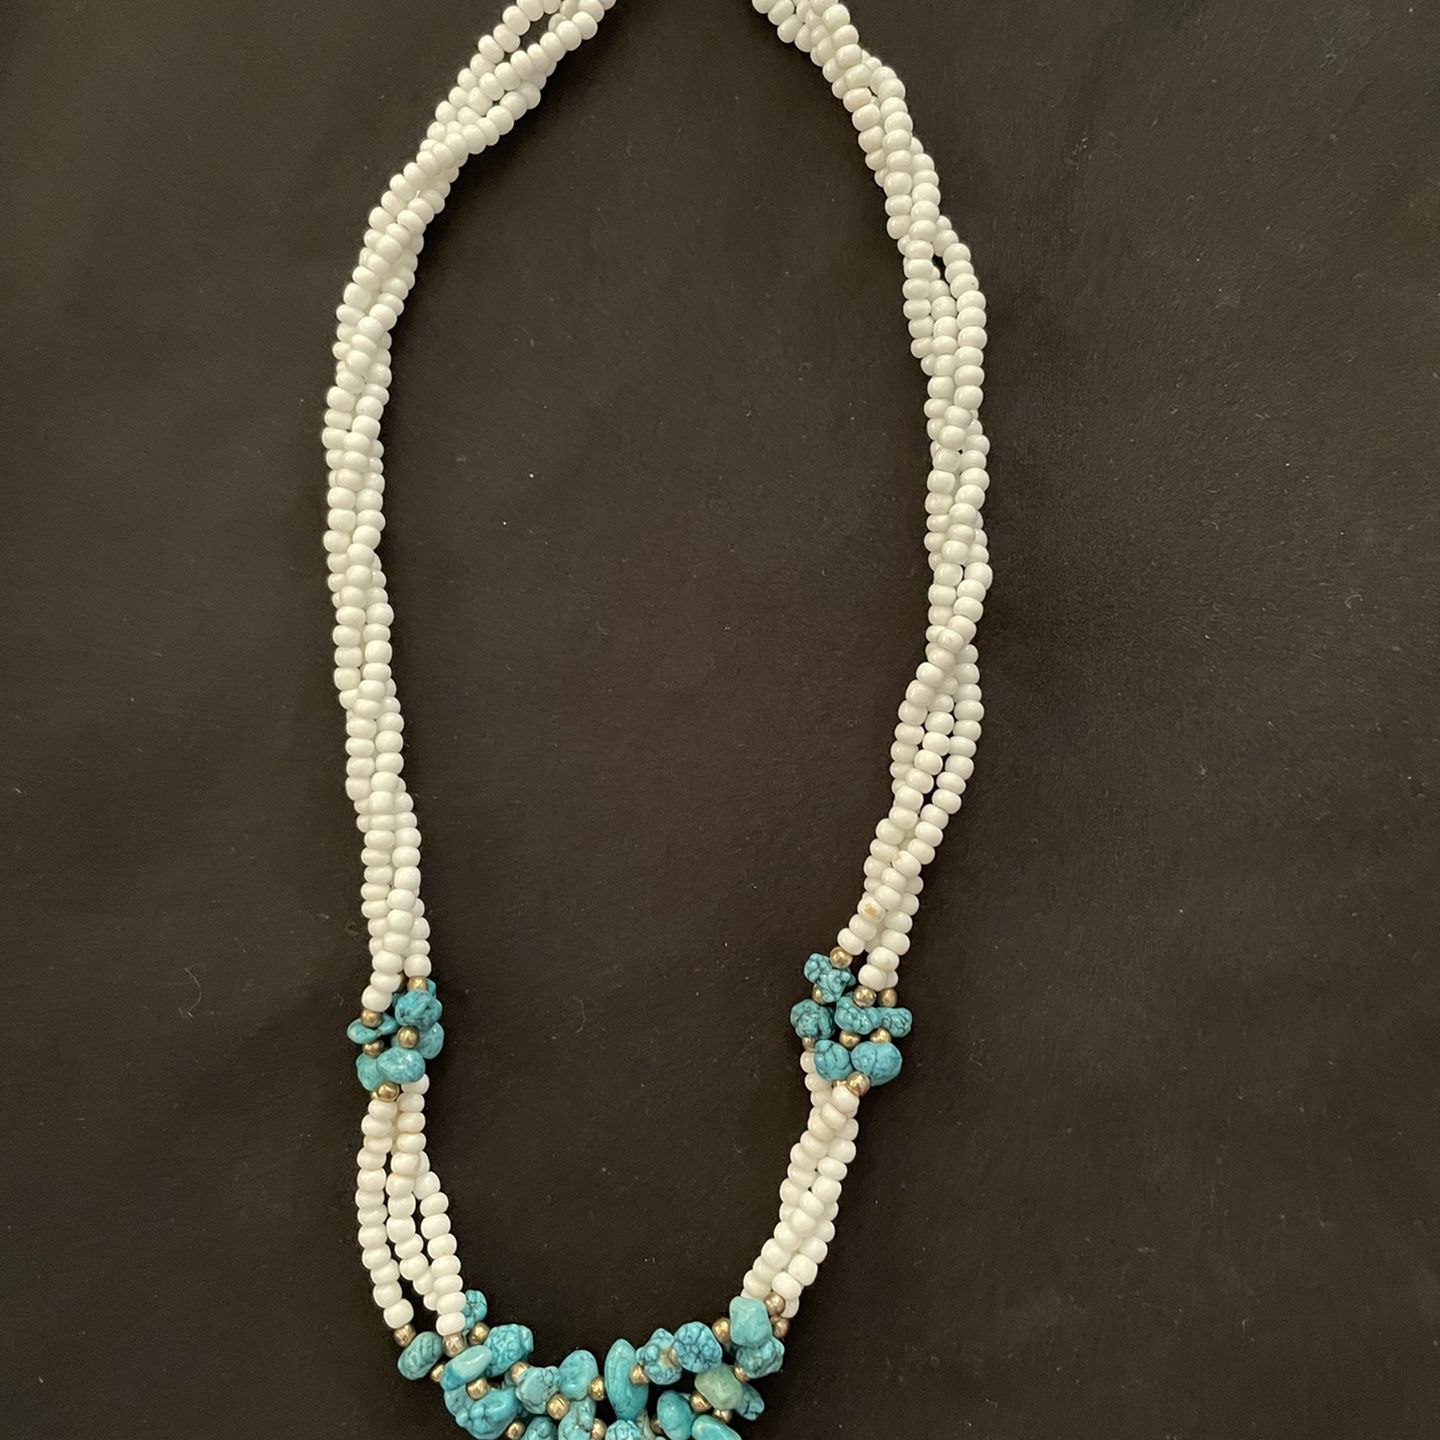 Beautiful Turquoise With White Beads Necklace